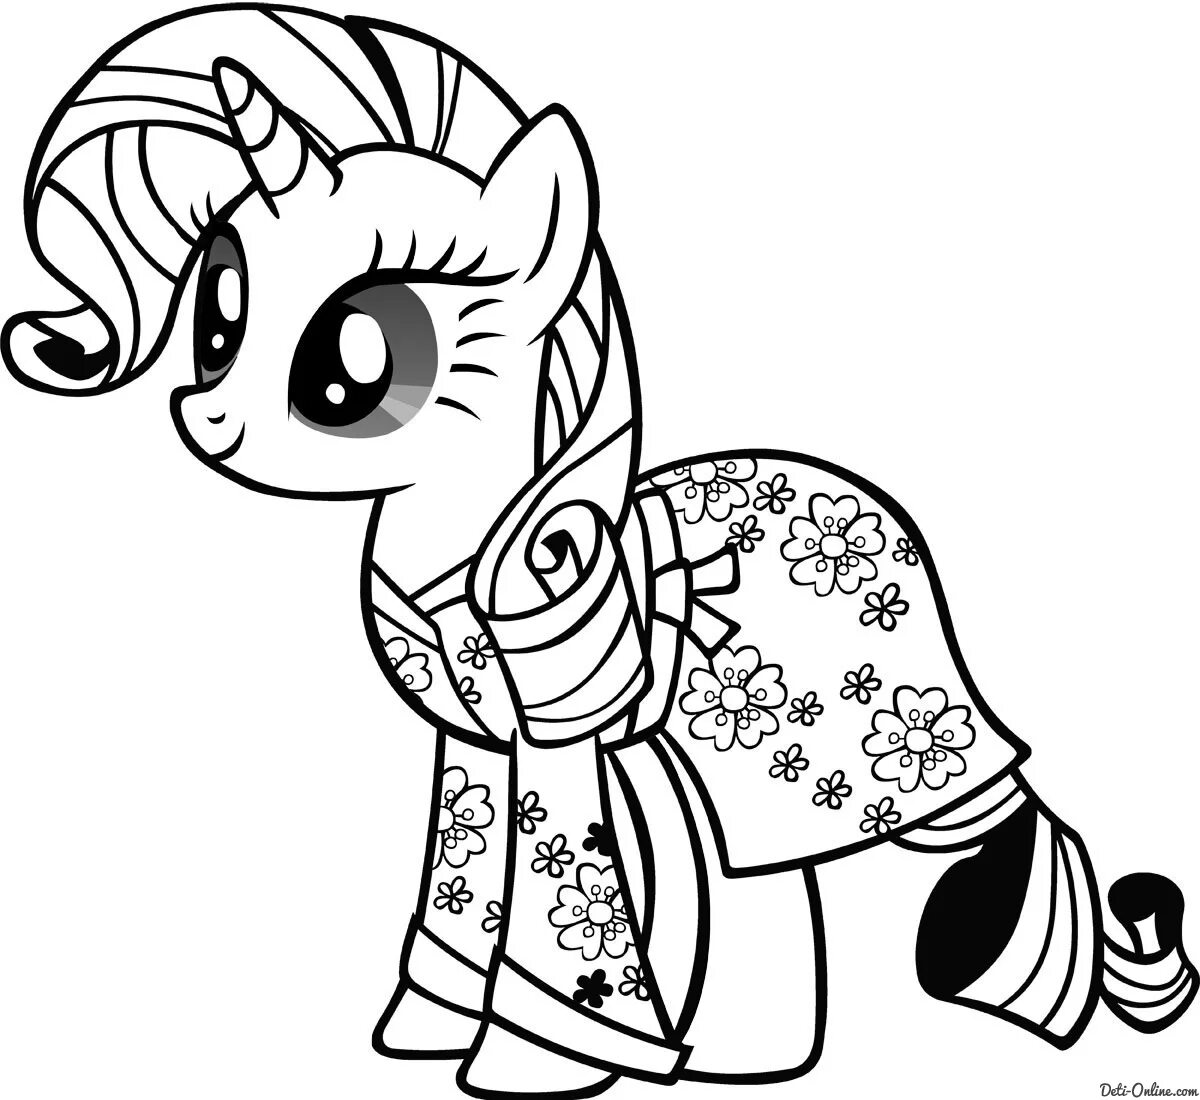 Gorgeous little pony coloring pages for kids